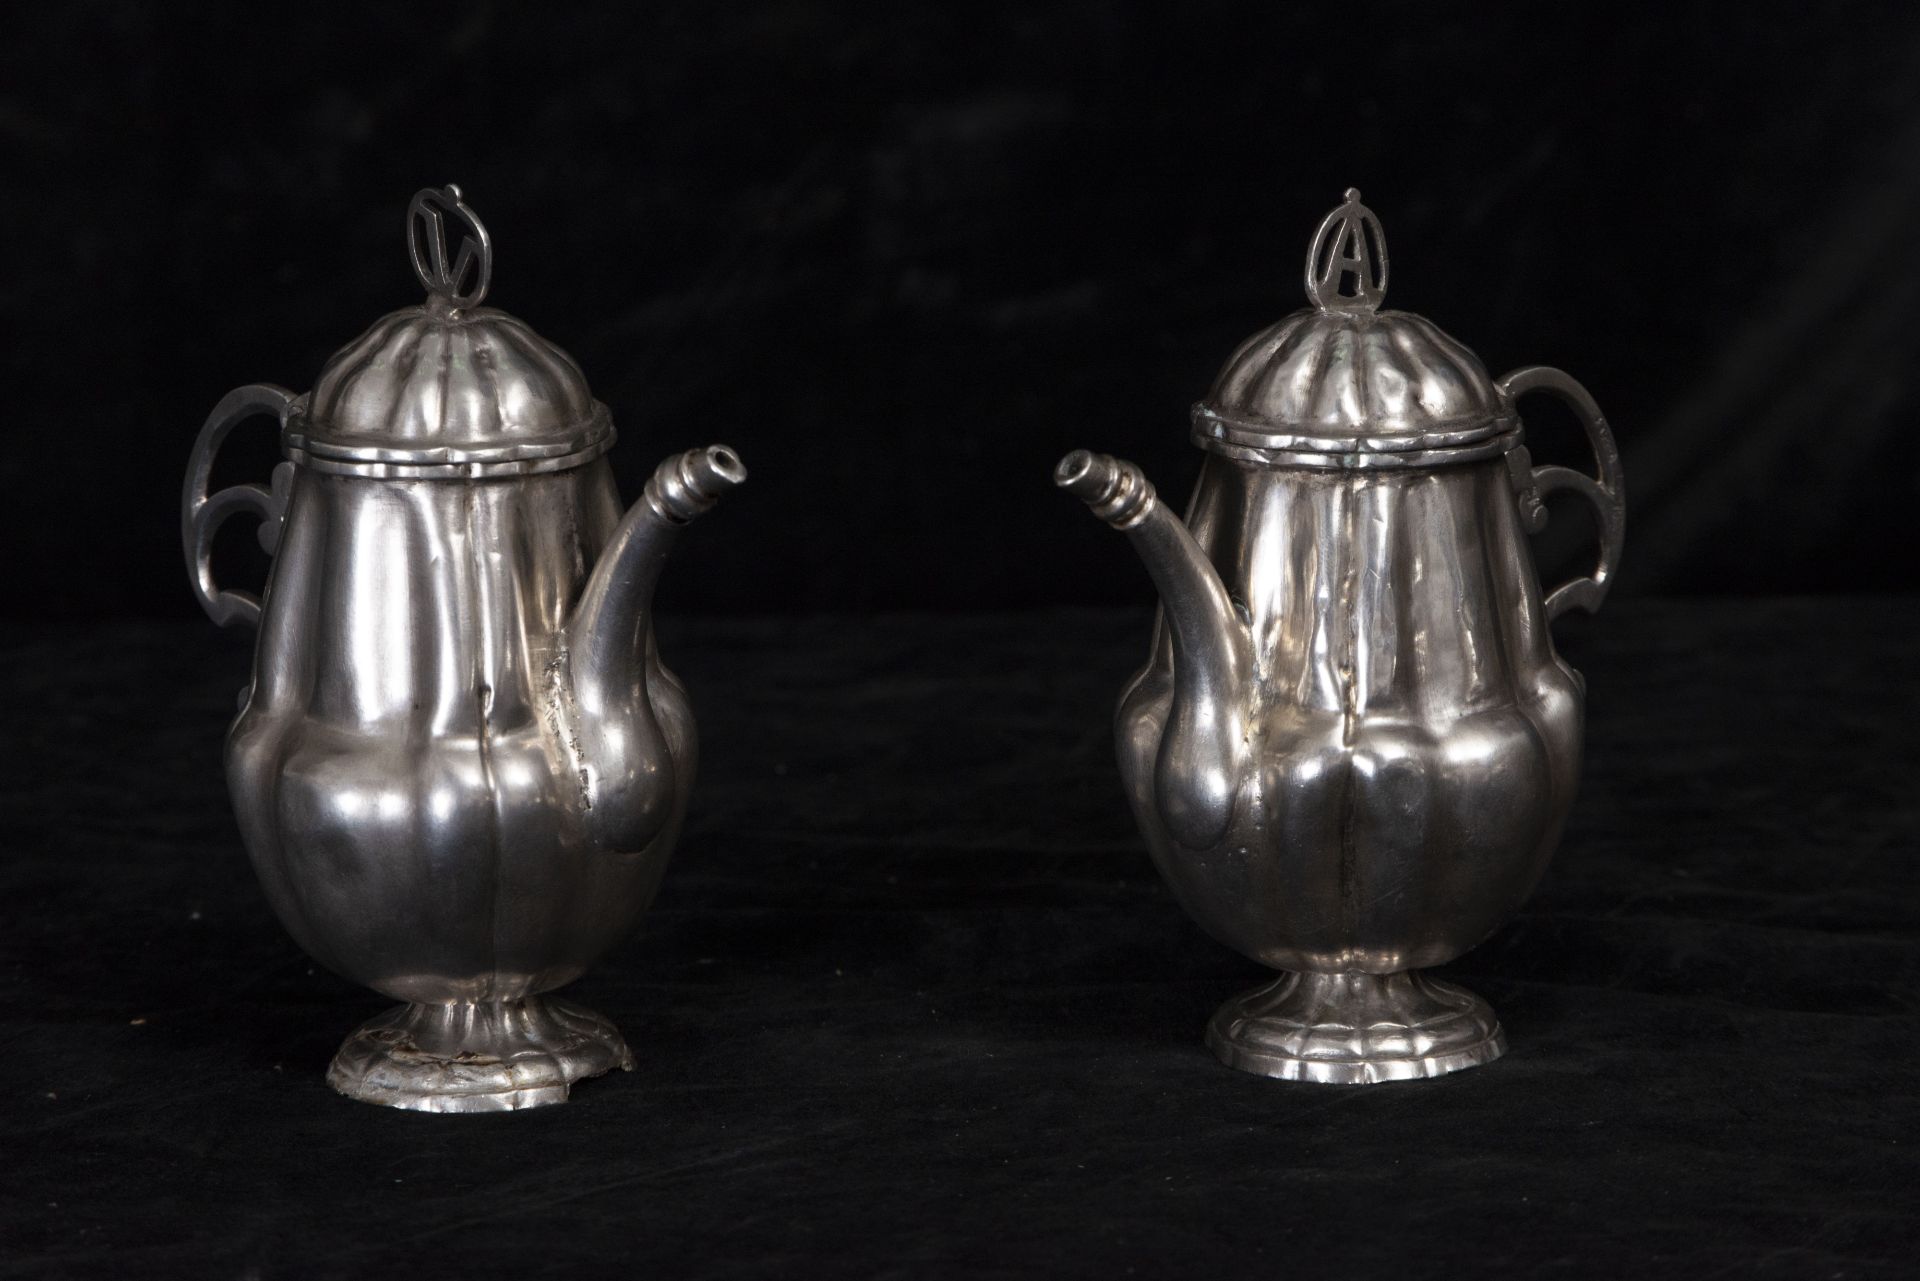 Pair of Cruet Cruets from the 18th century, Mexican colonial work, Viceroyalty of New Spain